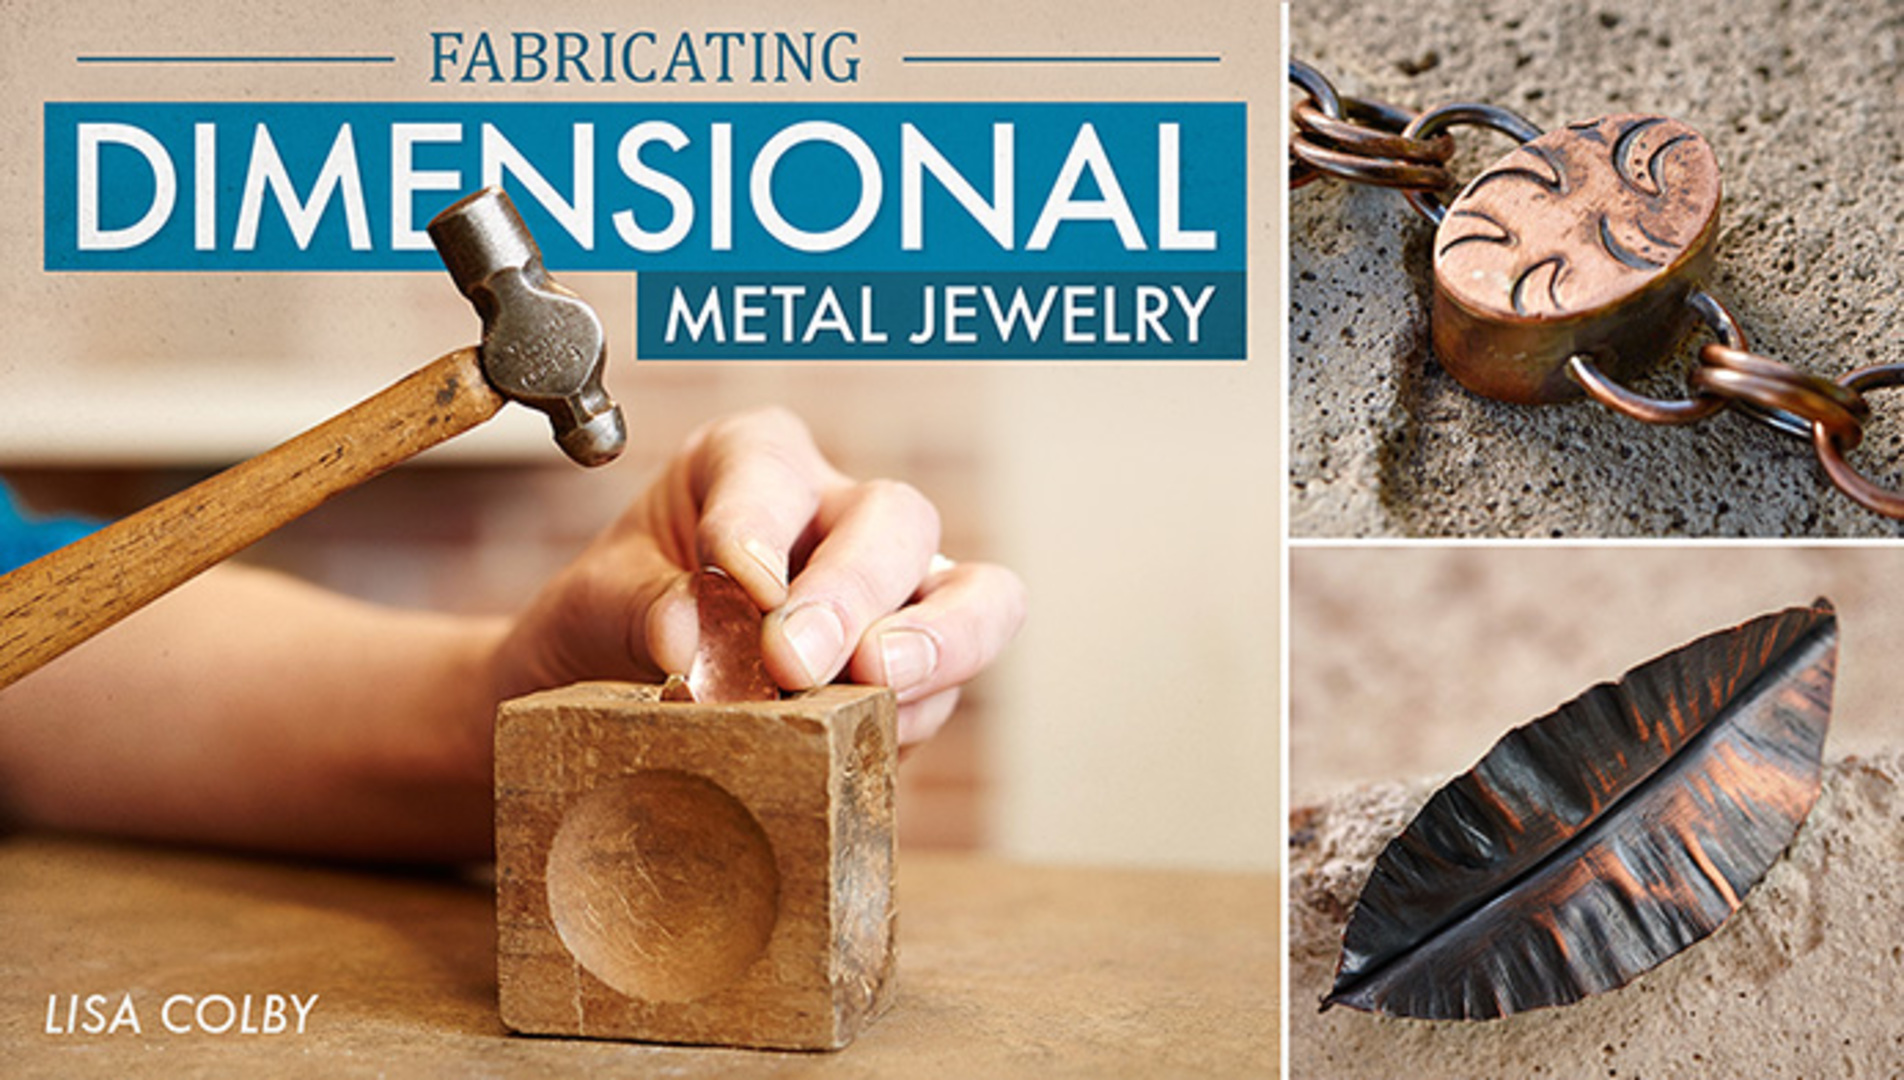 Fabricating Dimensional Metal Jewelry | Craftsy